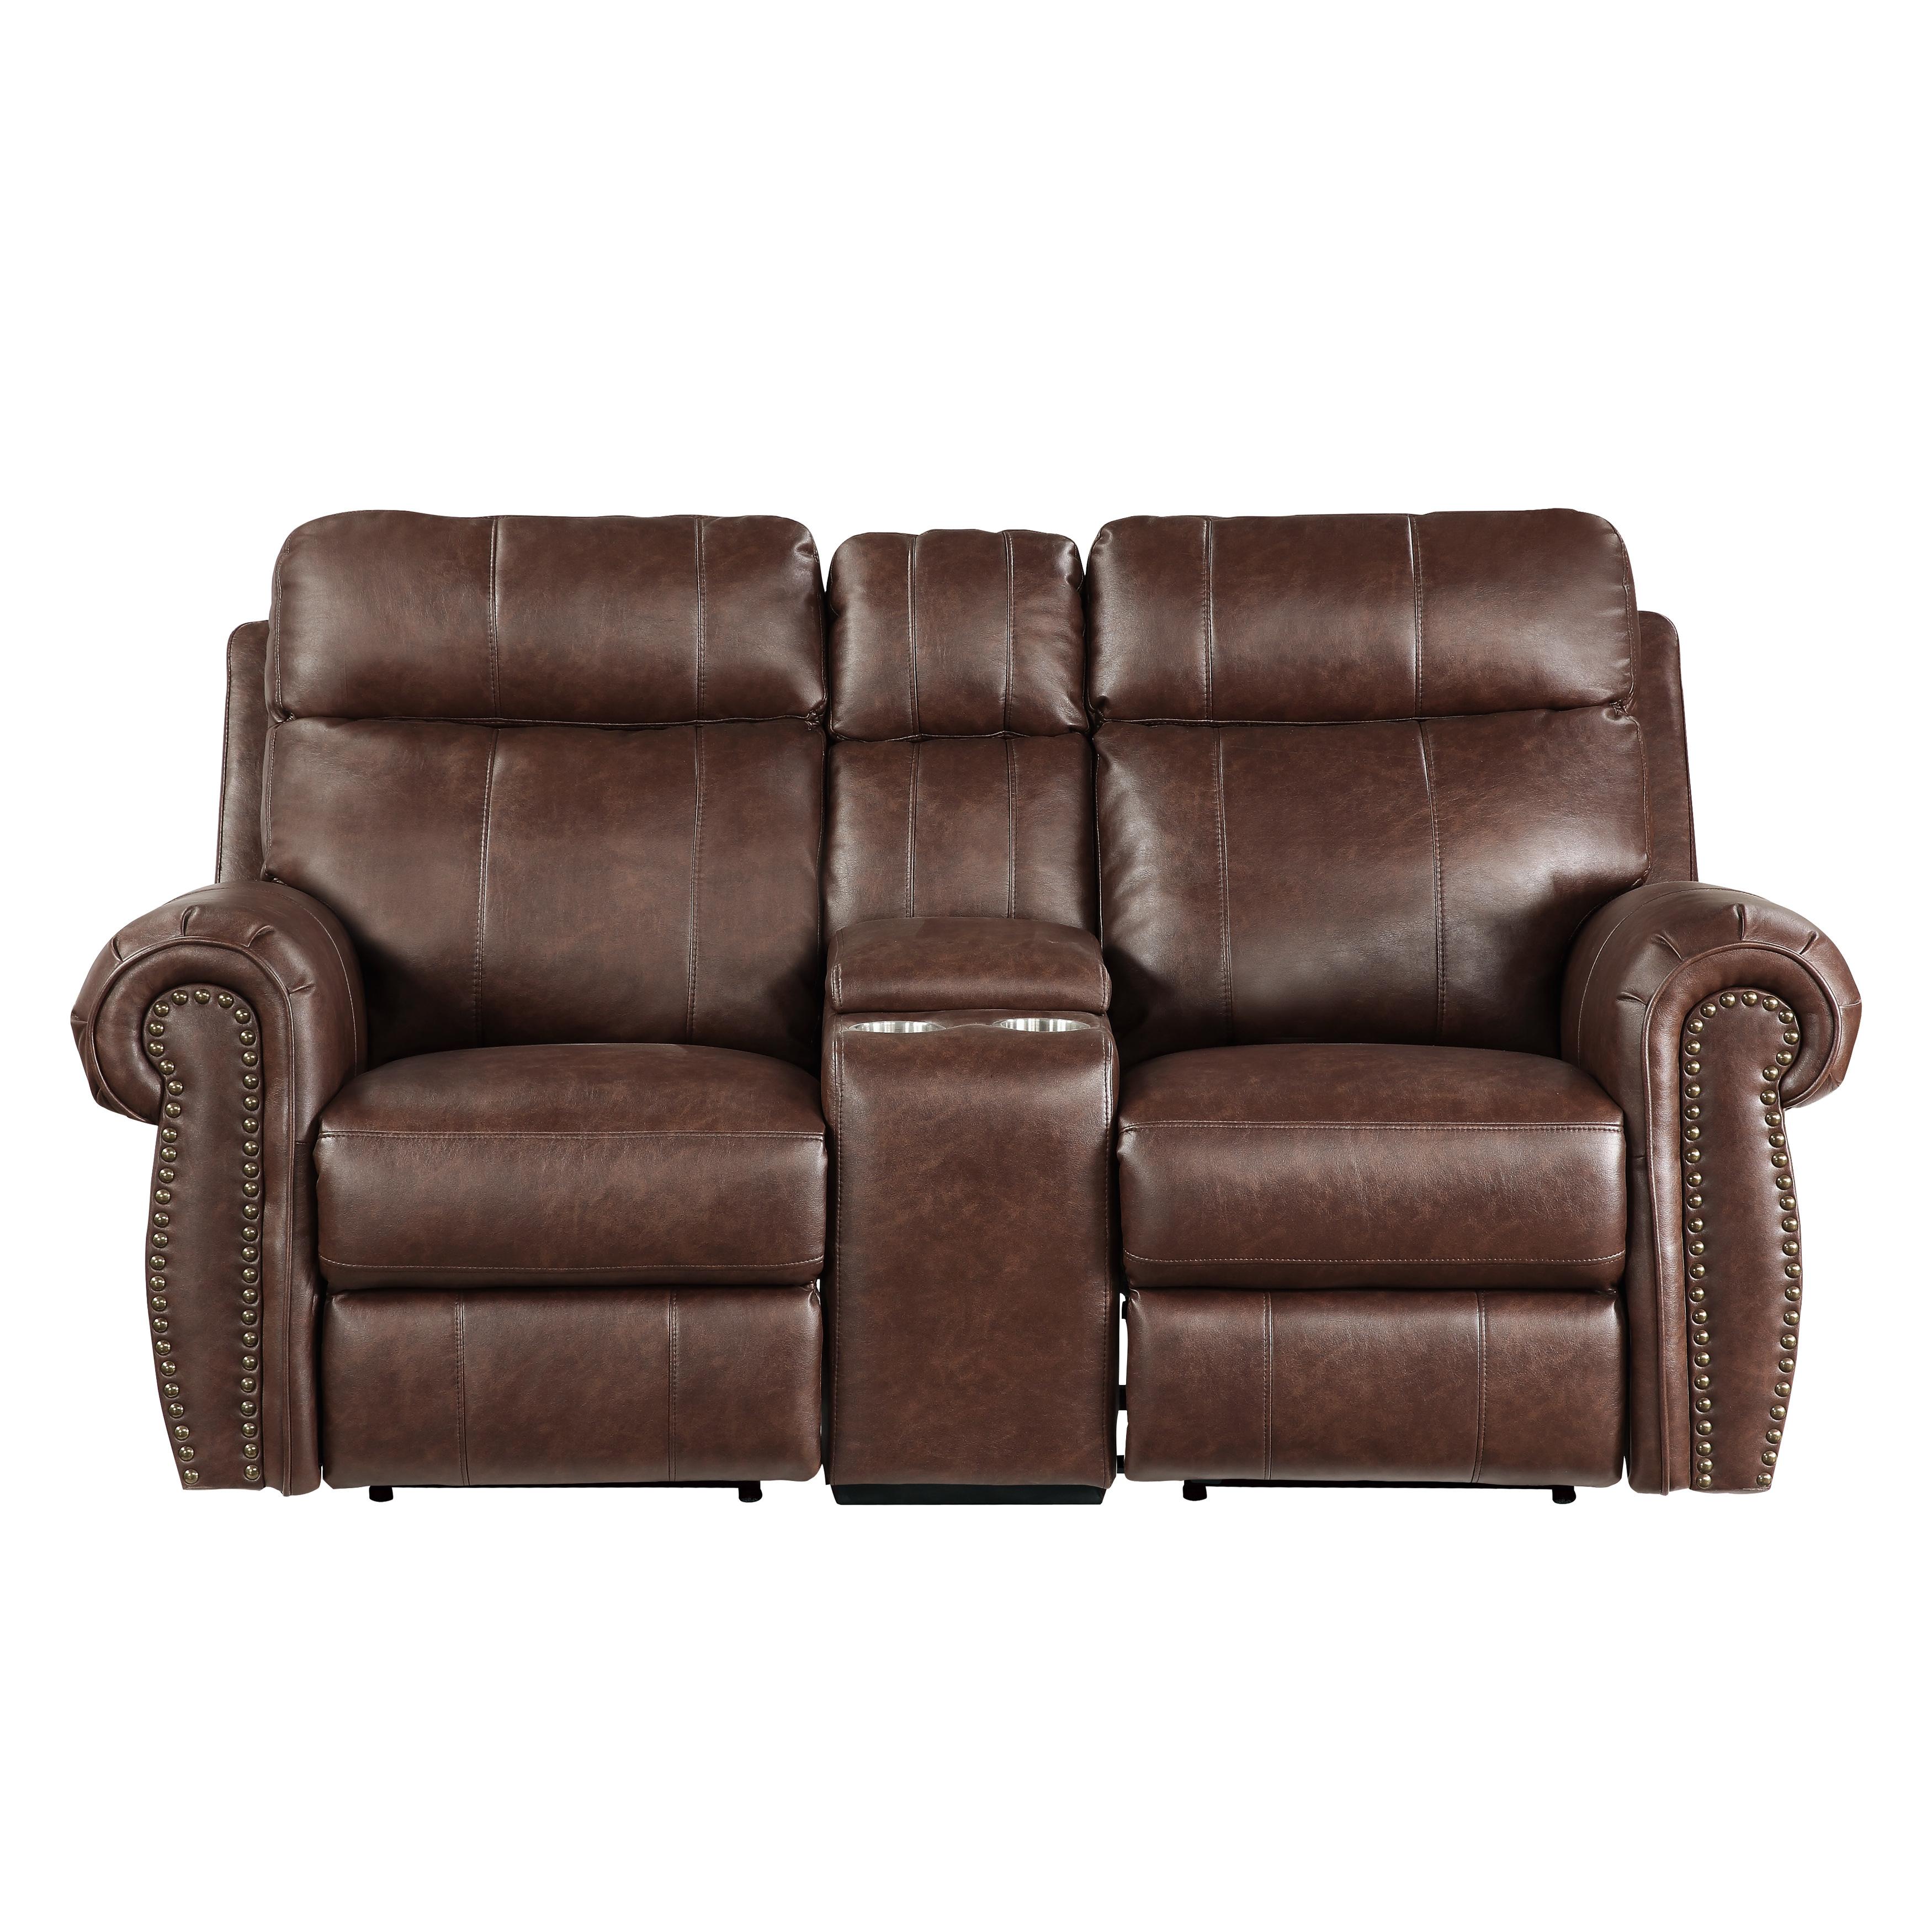 Transitional Power Reclining Loveseat 9488BR-2PW Granville 9488BR-2PW in Brown Microfiber